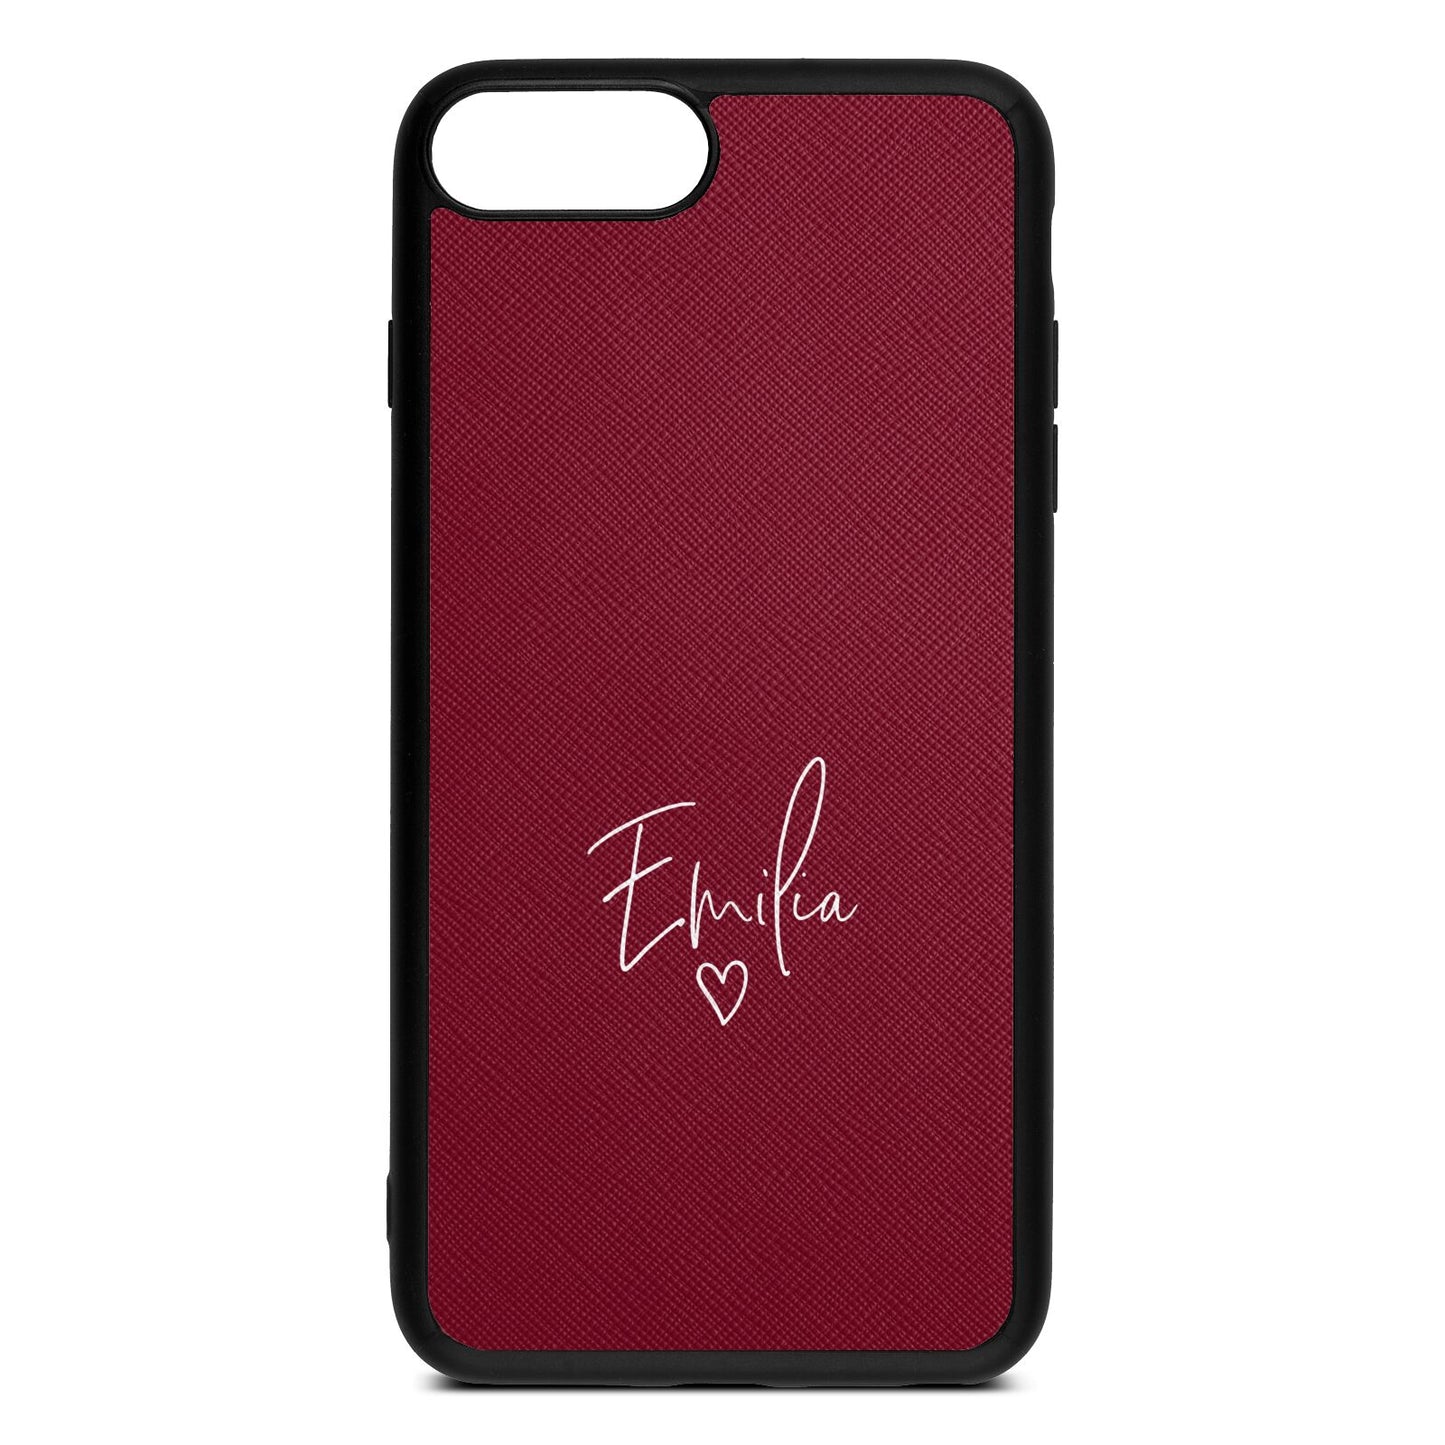 White Handwritten Name Transparent Wine Red Saffiano Leather iPhone 8 Plus Case